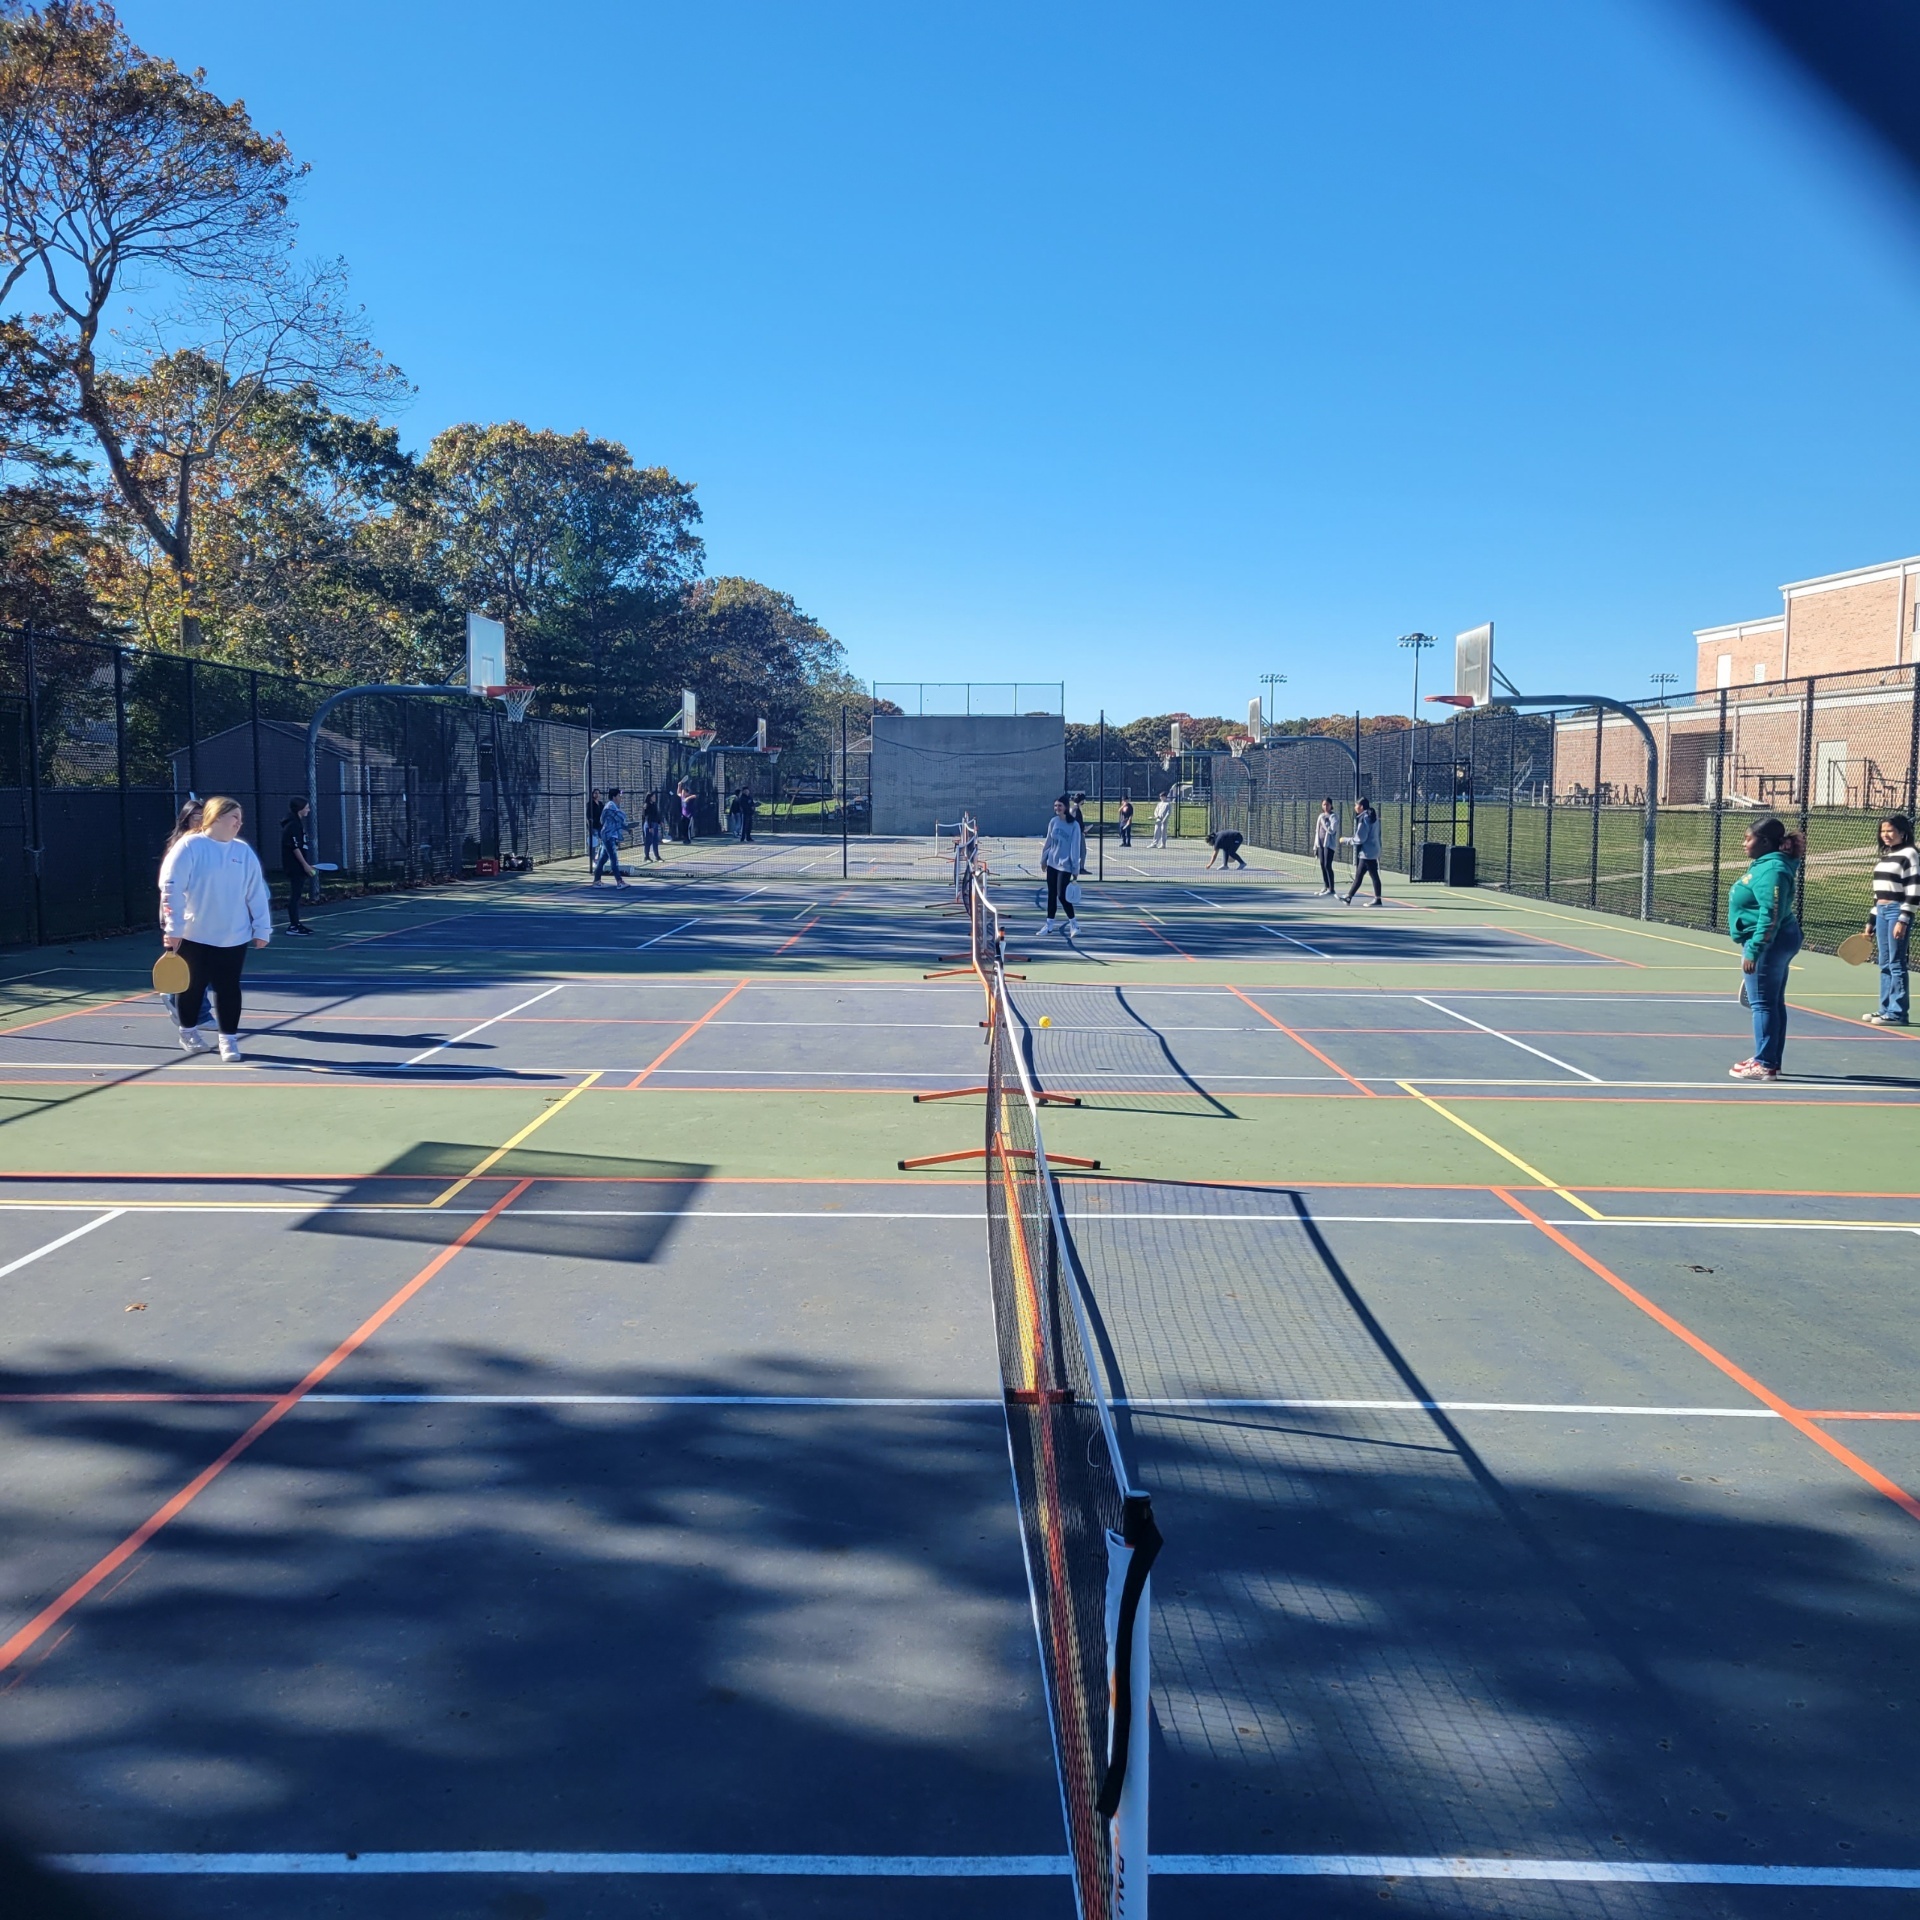 Hampton Bays schools relined what had been badminton courts previously to pickleball courts.